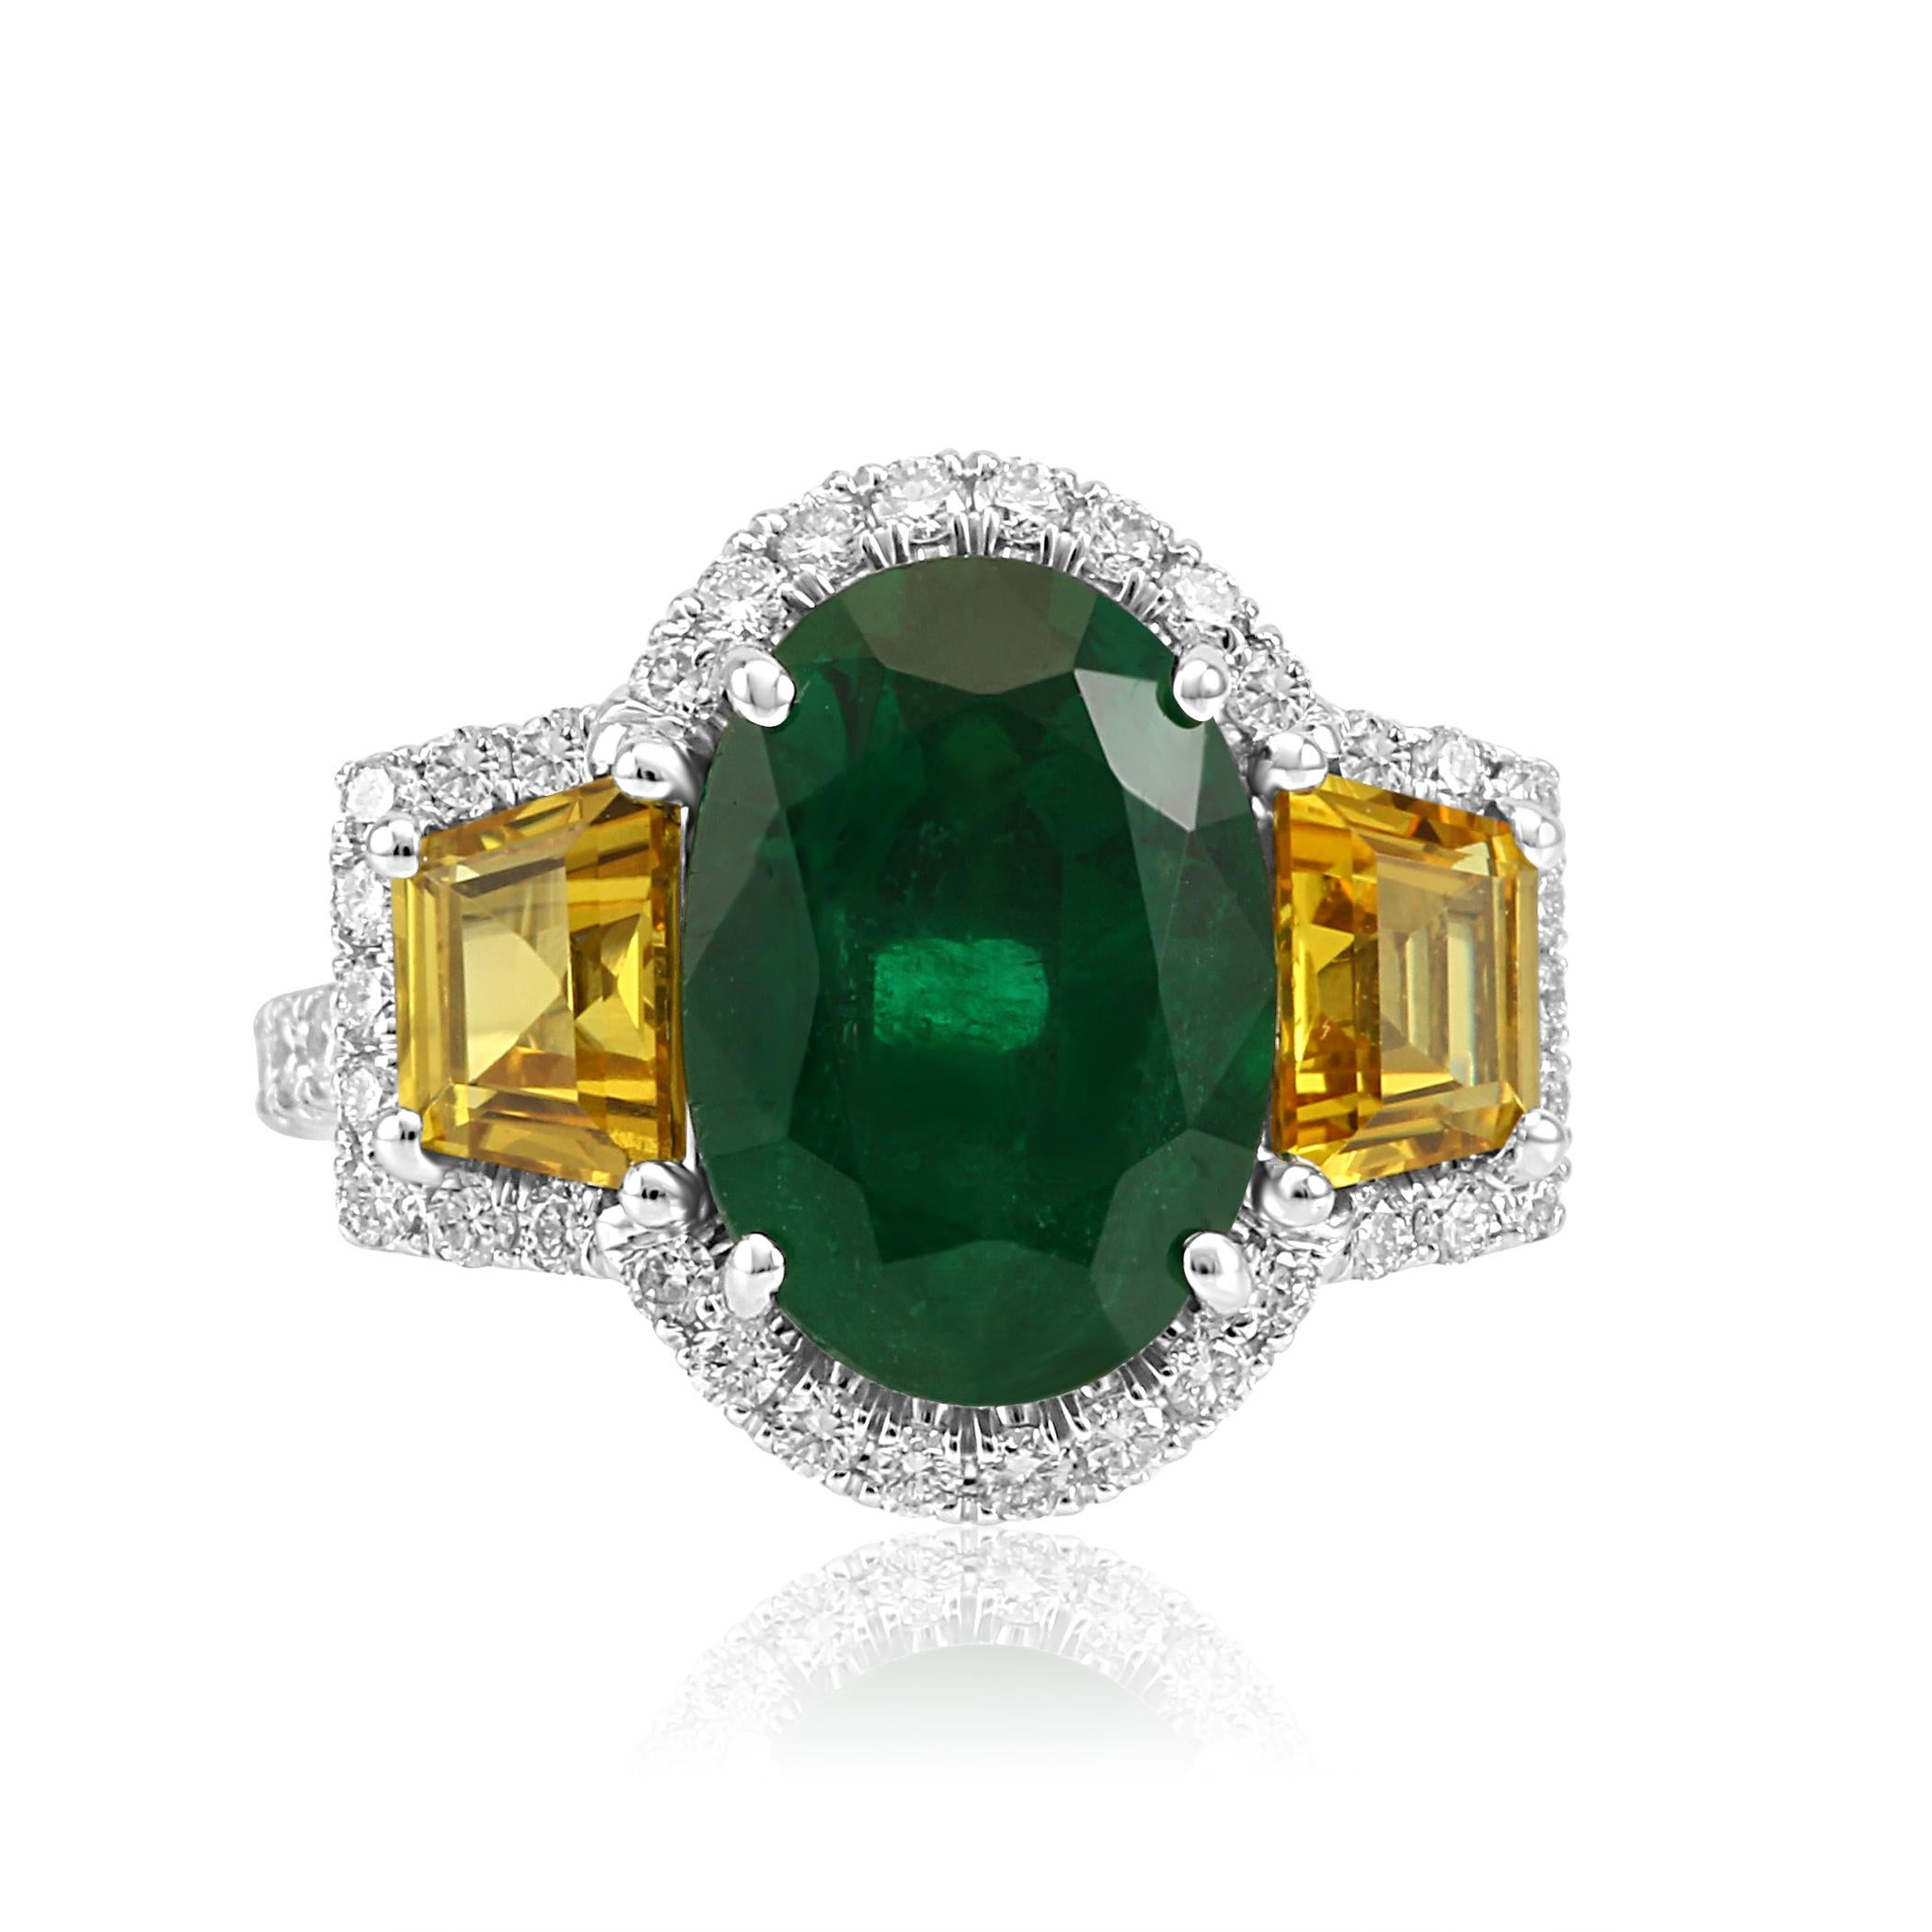 1 Stunning Emerald Oval GIA Certified 5.11 Carat Flanked with 2 Yellow Sapphire Trapezoid 1.82 Carat encircled in Single Halo of White G-H Color VS-SI Diamonds 0.90 Carat set in One of a Kind Three Stone Bridal Fashion Cocktail 18K White and Yellow